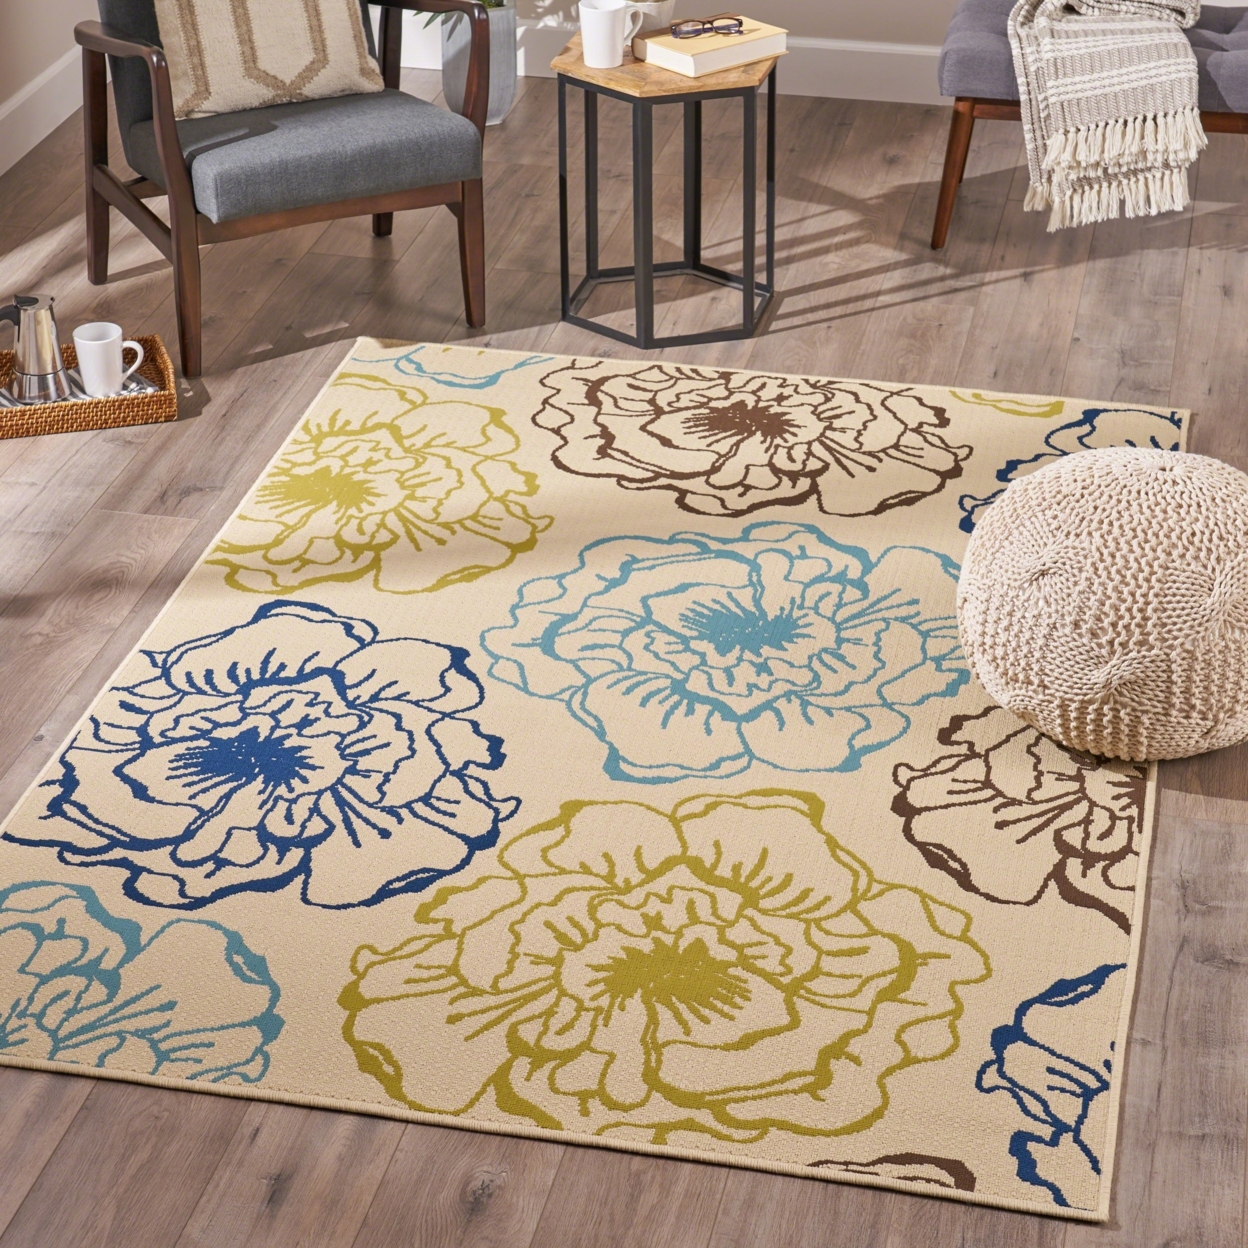 Joe Indoor Floral 5 X 8 Area Rug, Ivory And Green